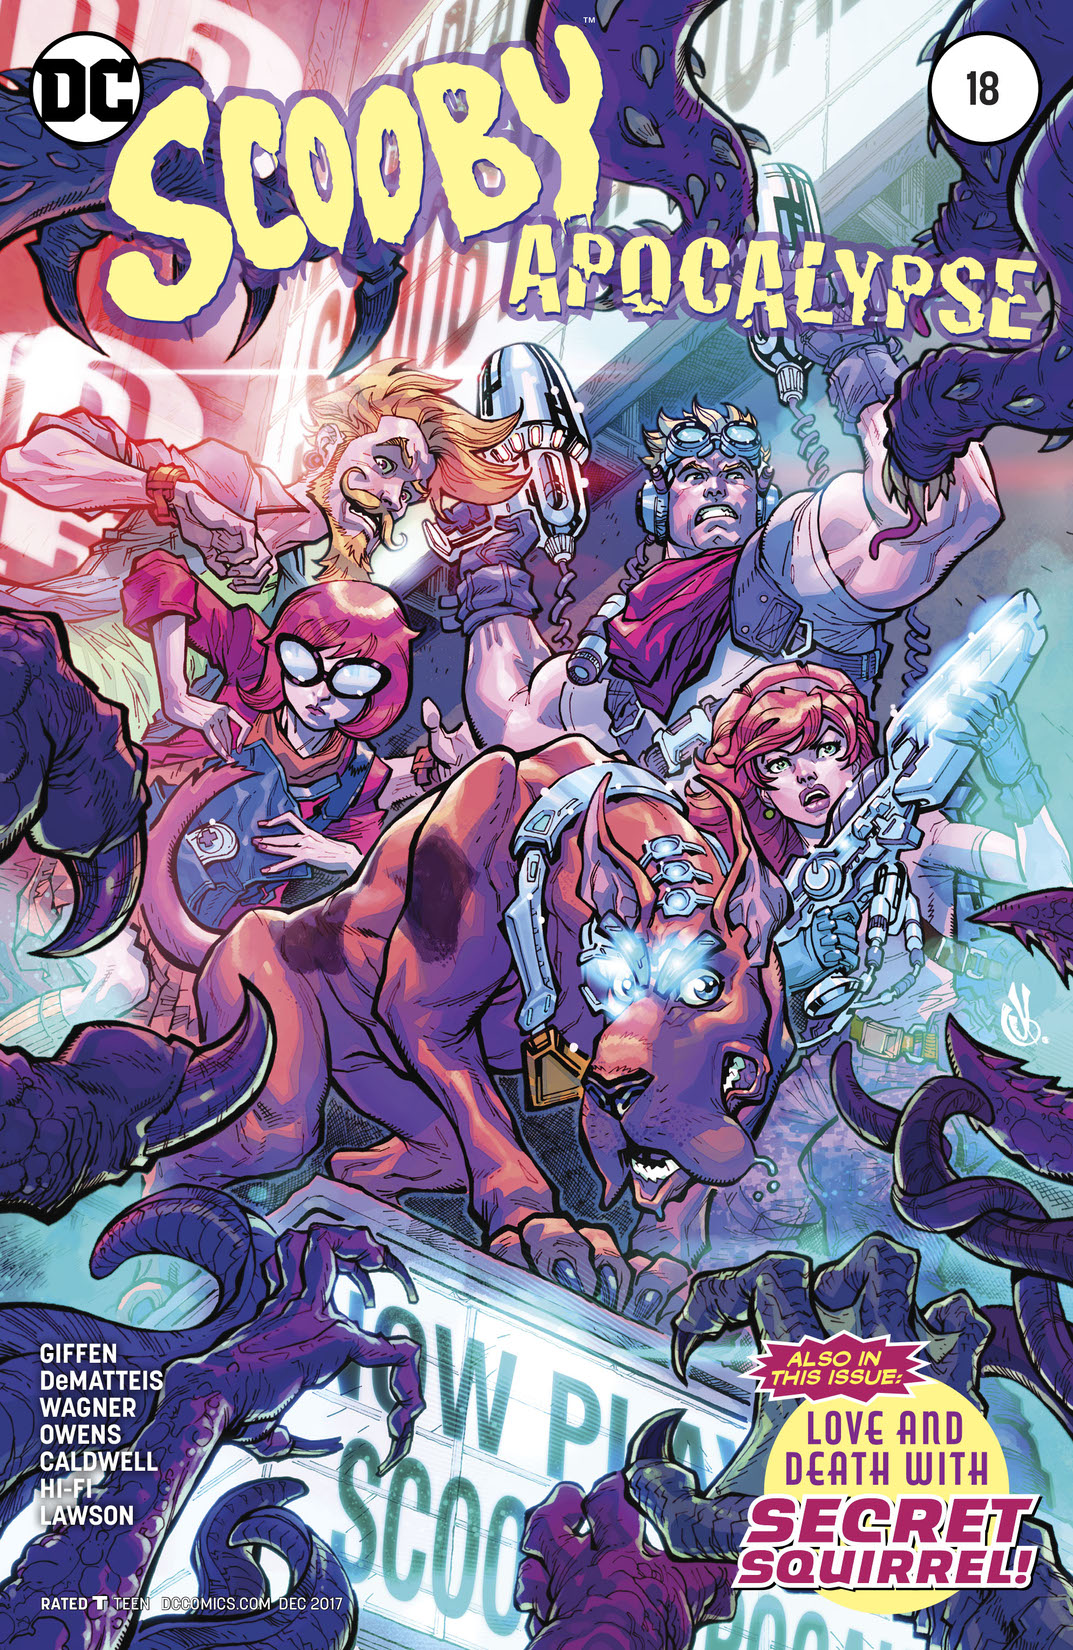 Scooby Apocalypse #18 preview images